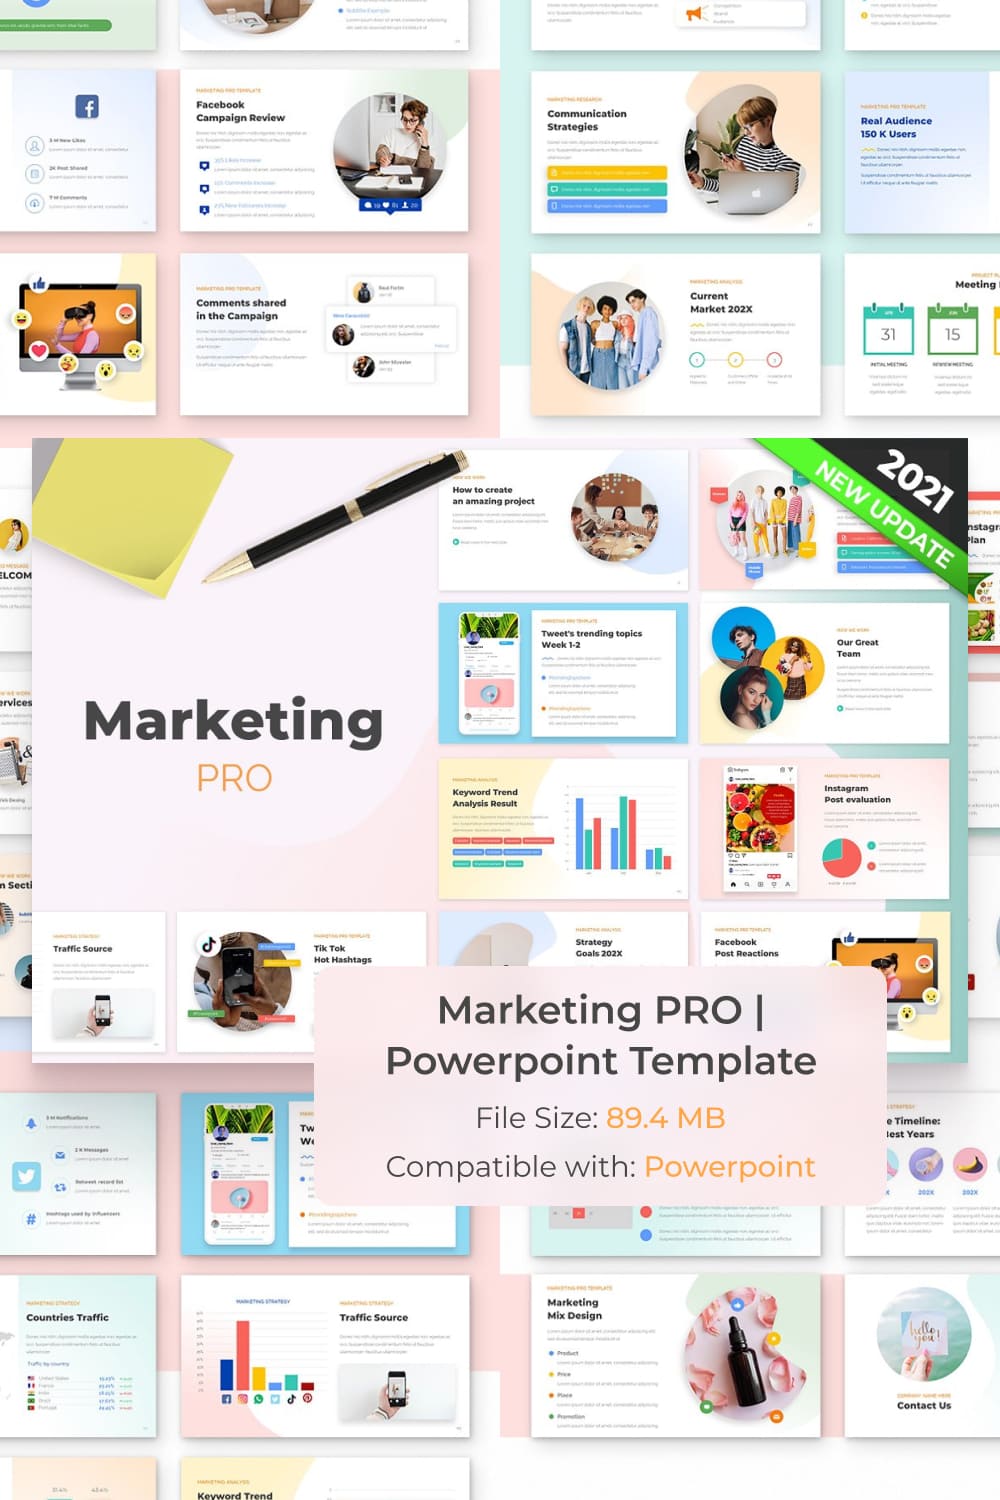 Marketing PRO Powerpoint Template by MasterBundles Pinterest Collage Image.